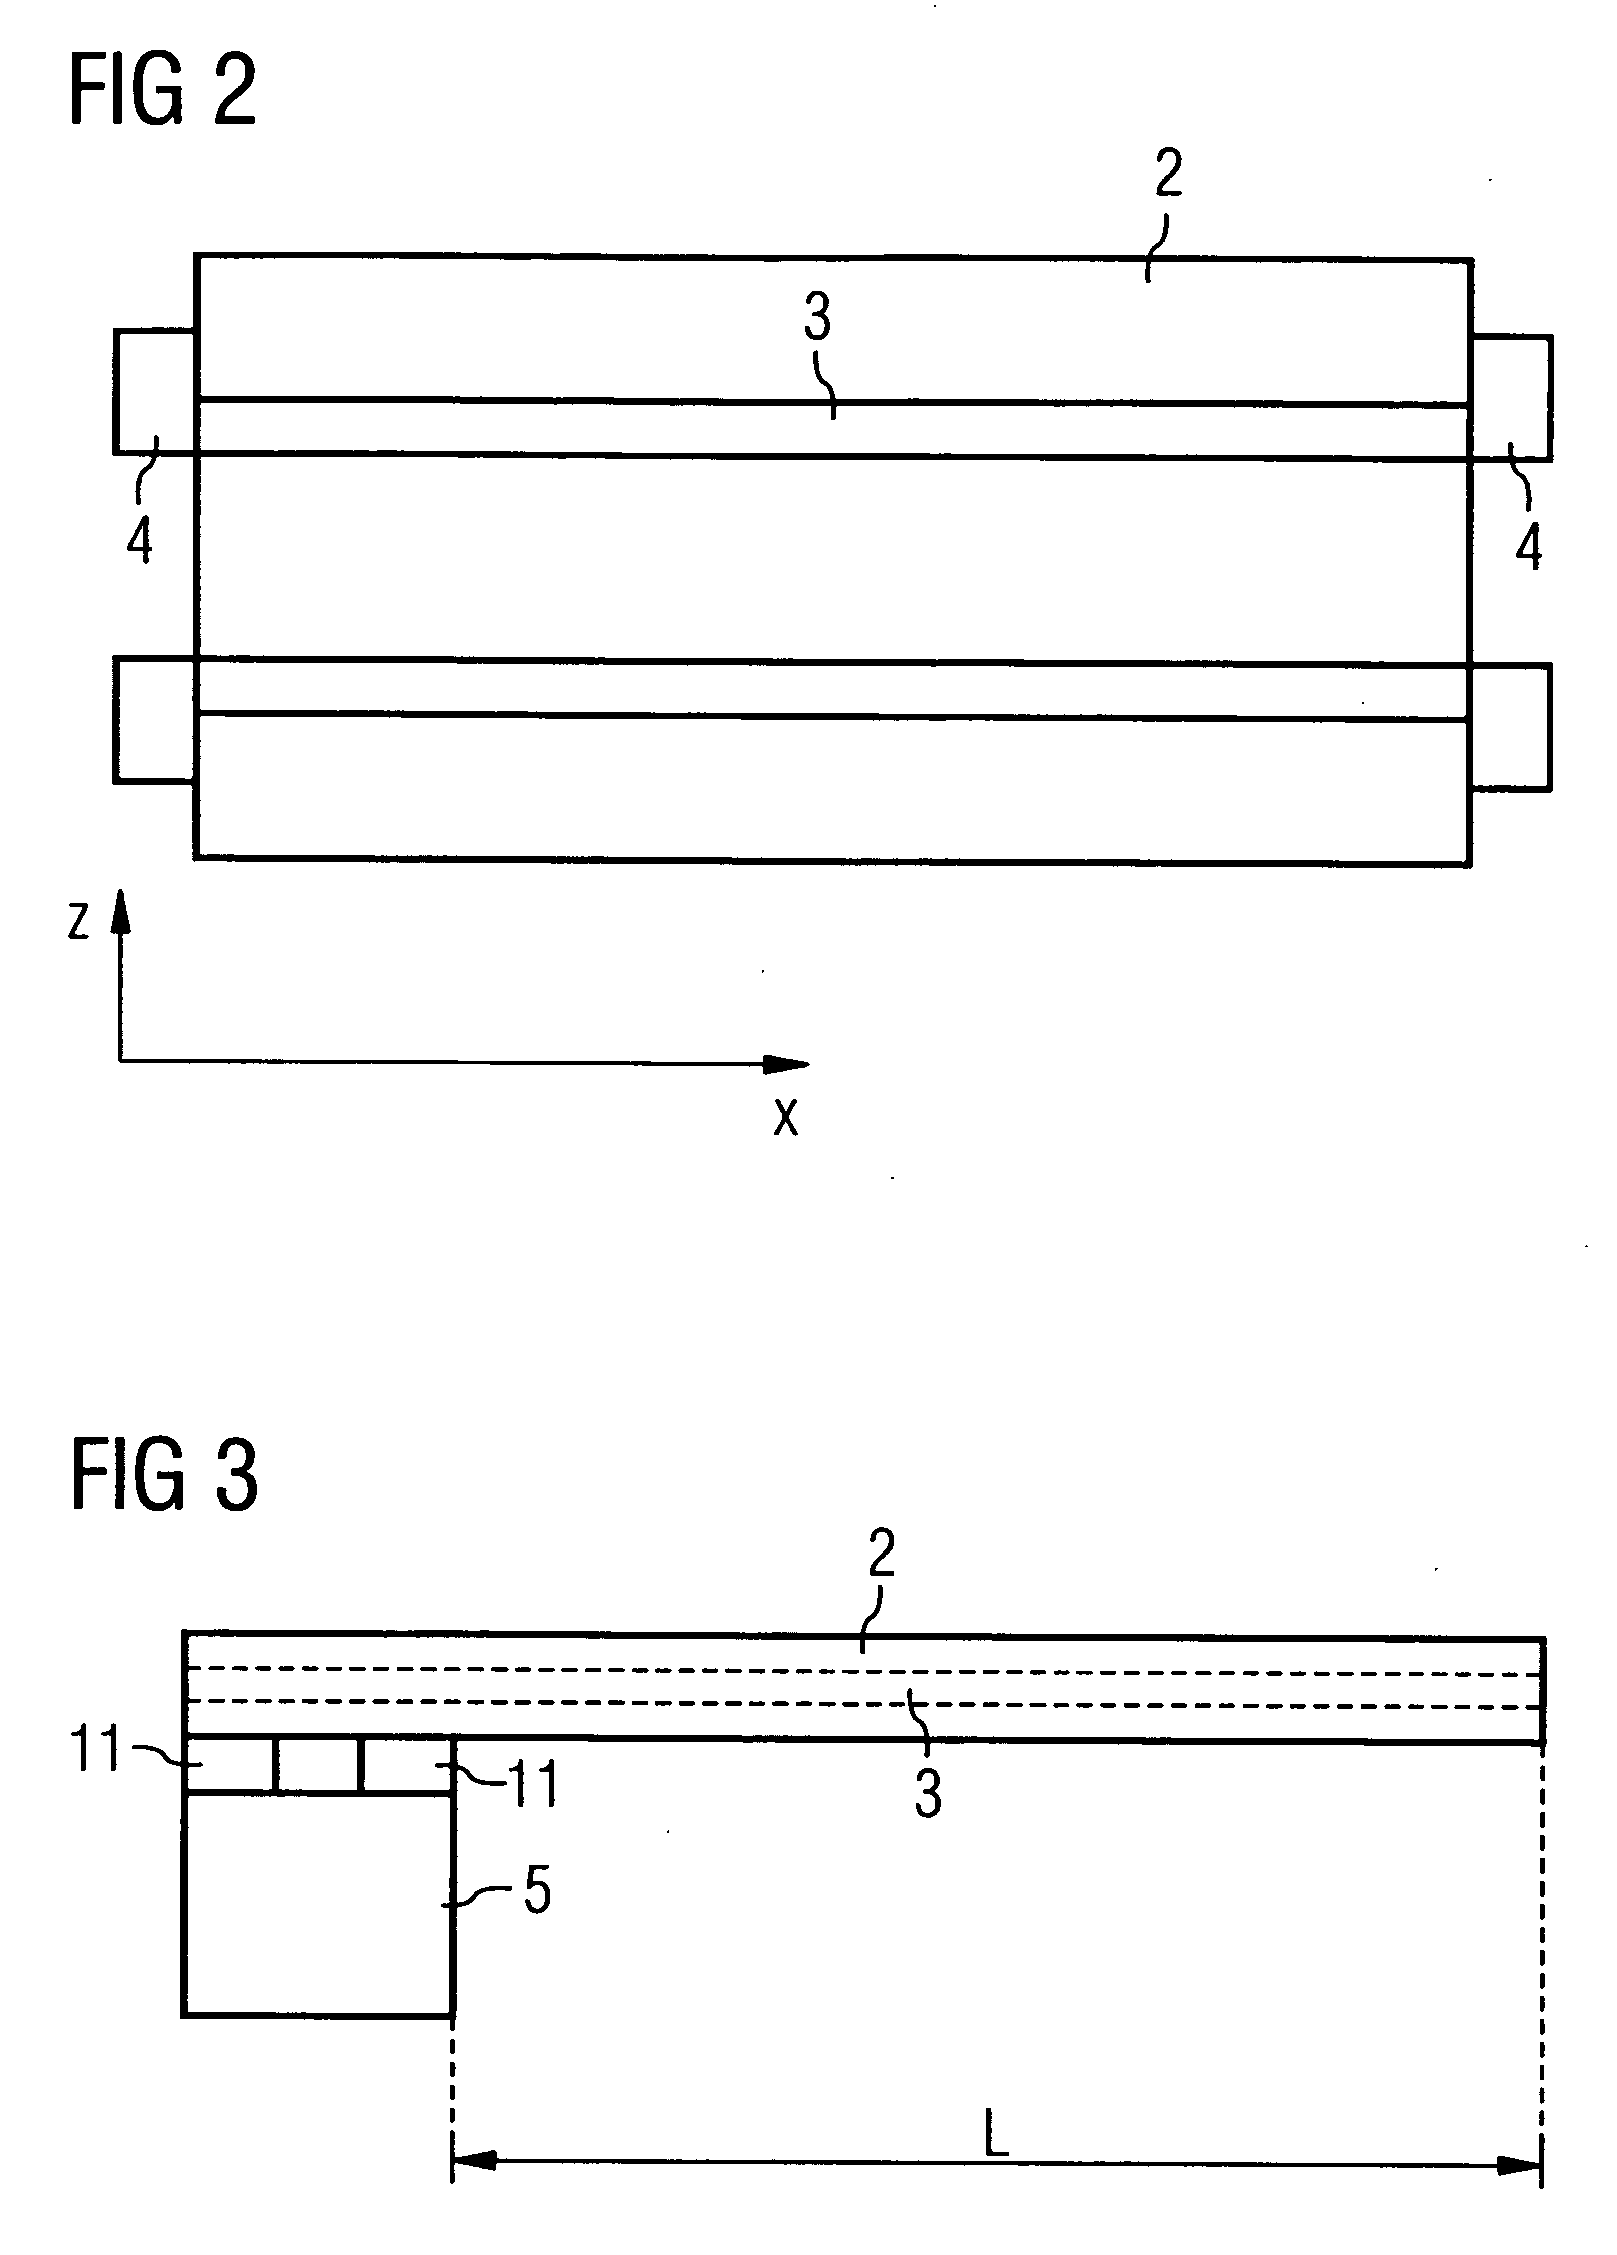 Apparatus and method for determining a position of a patient in a medical examination